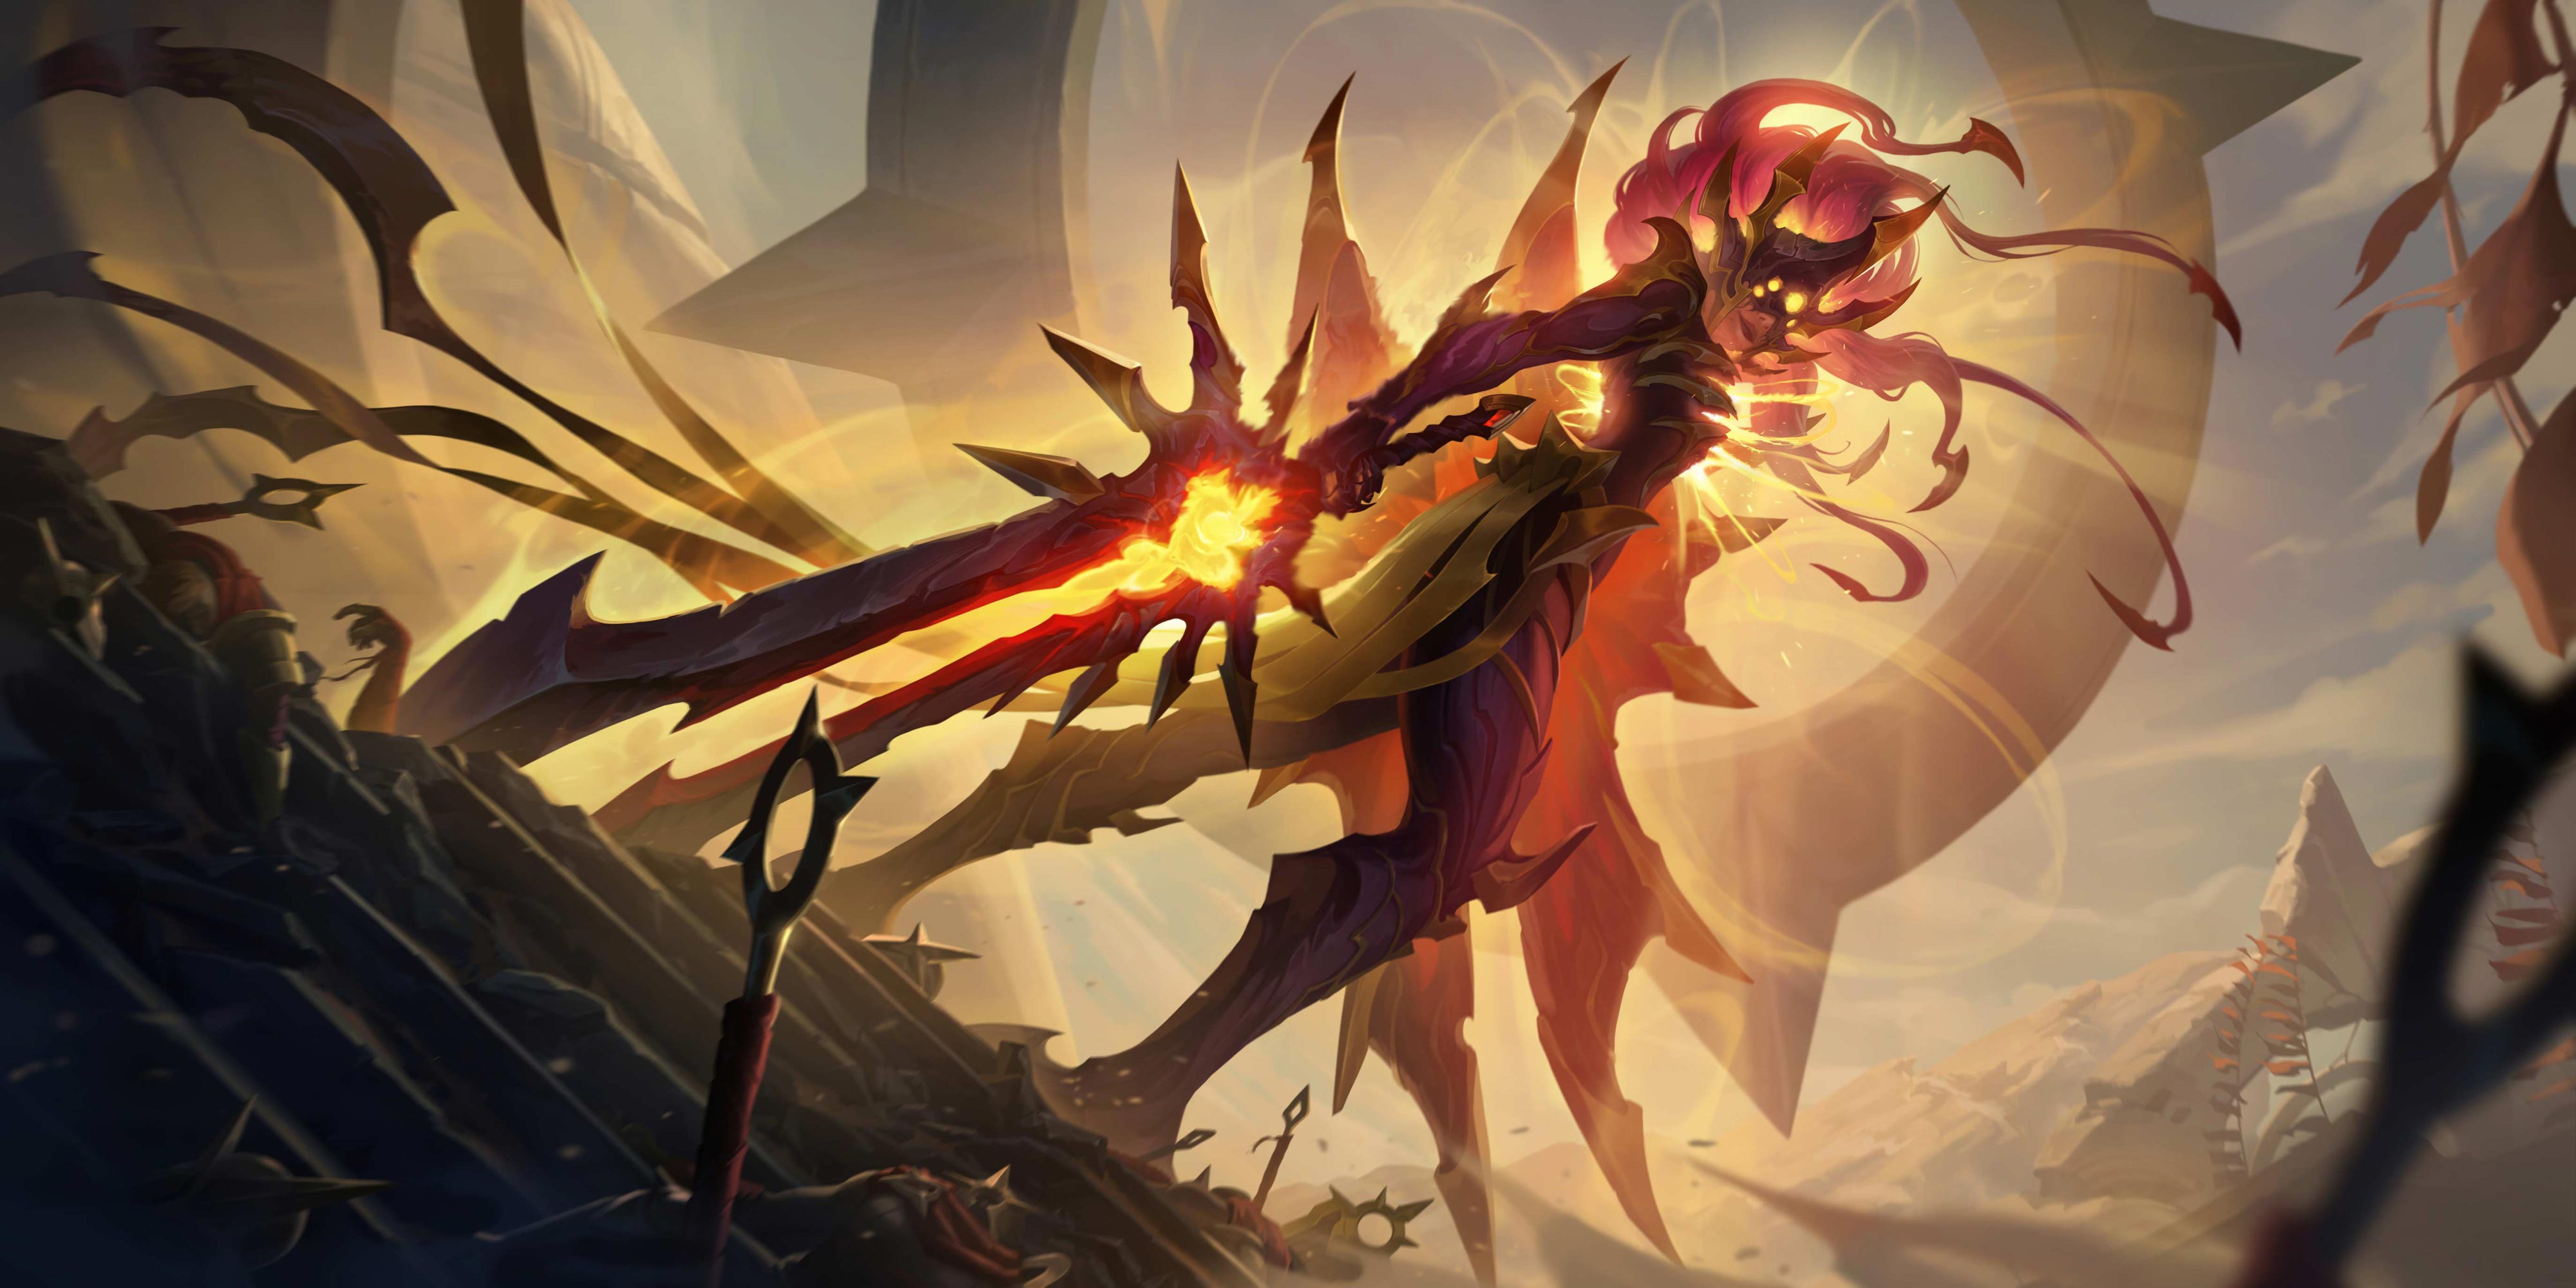 Legends of Runeterra - Corrupted Leona, a woman warrior with who wields blazing sun in the heart of a dark sword. She is smiling to herself on a platform, surrounded by the downed bodies of her attackers.